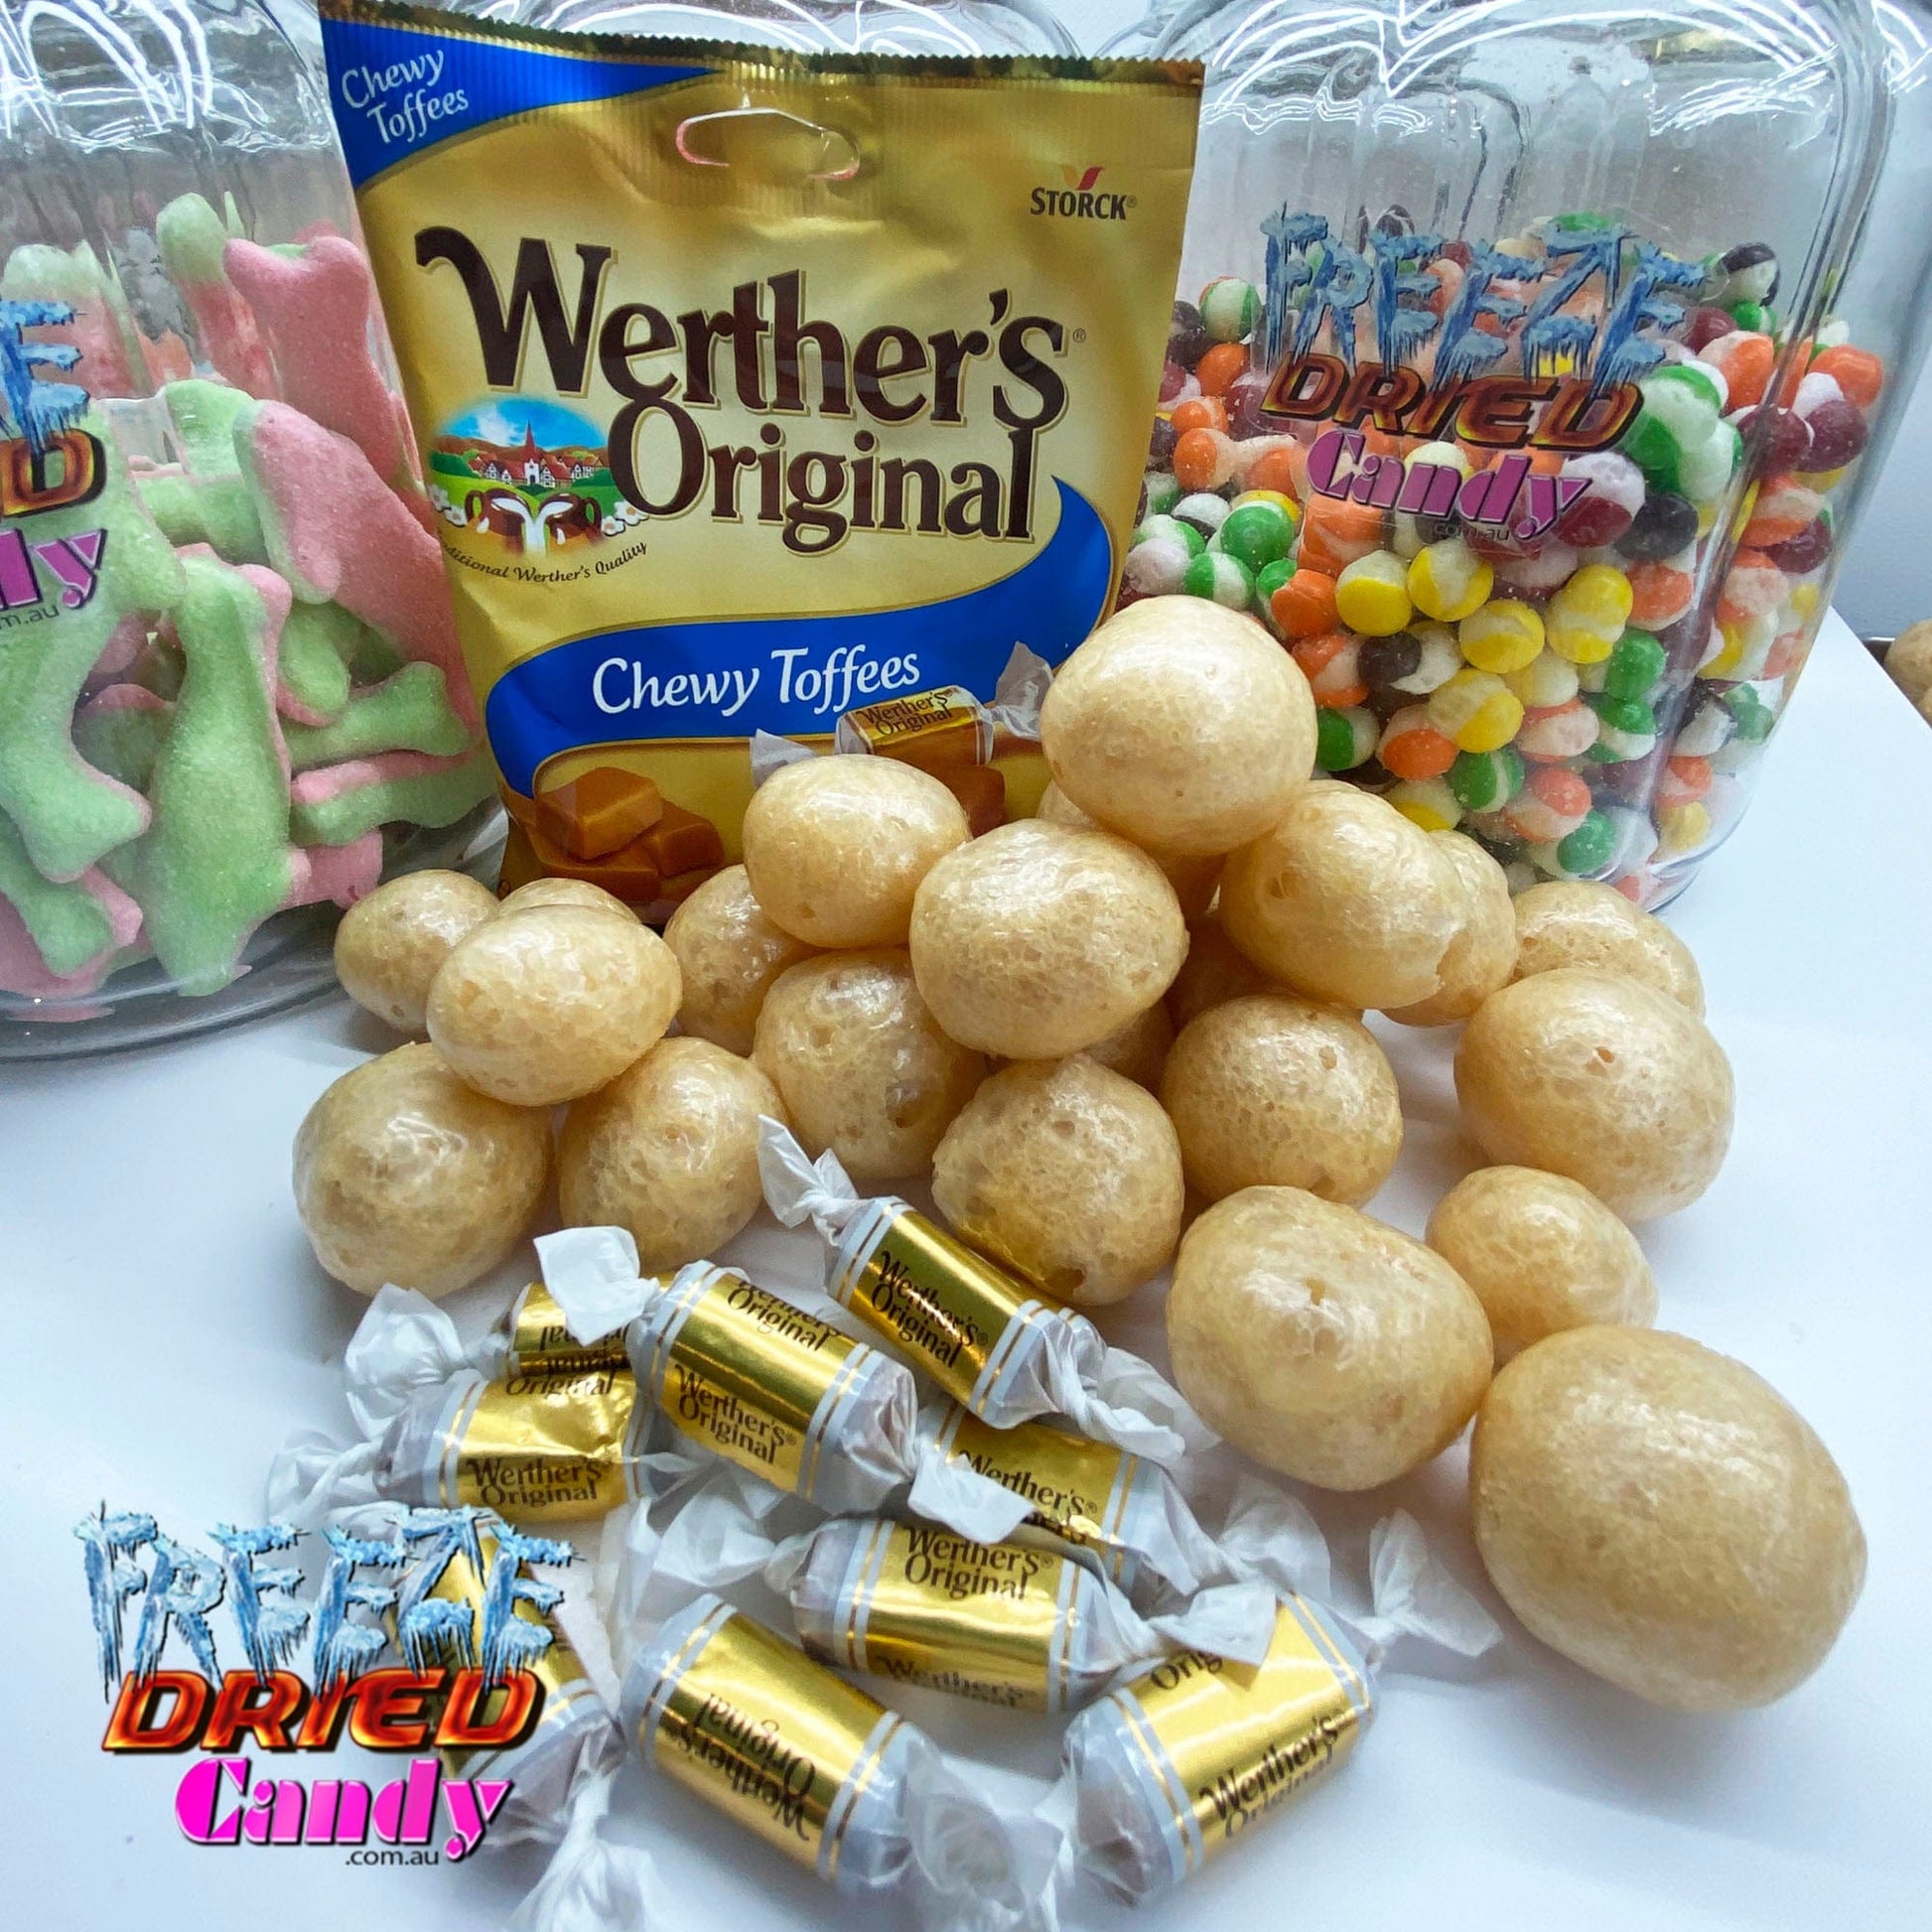 Freeze Dried Werther's Original Chewy Toffee - Freeze Dried Candy Lollies Sweets Treats Ice Cream